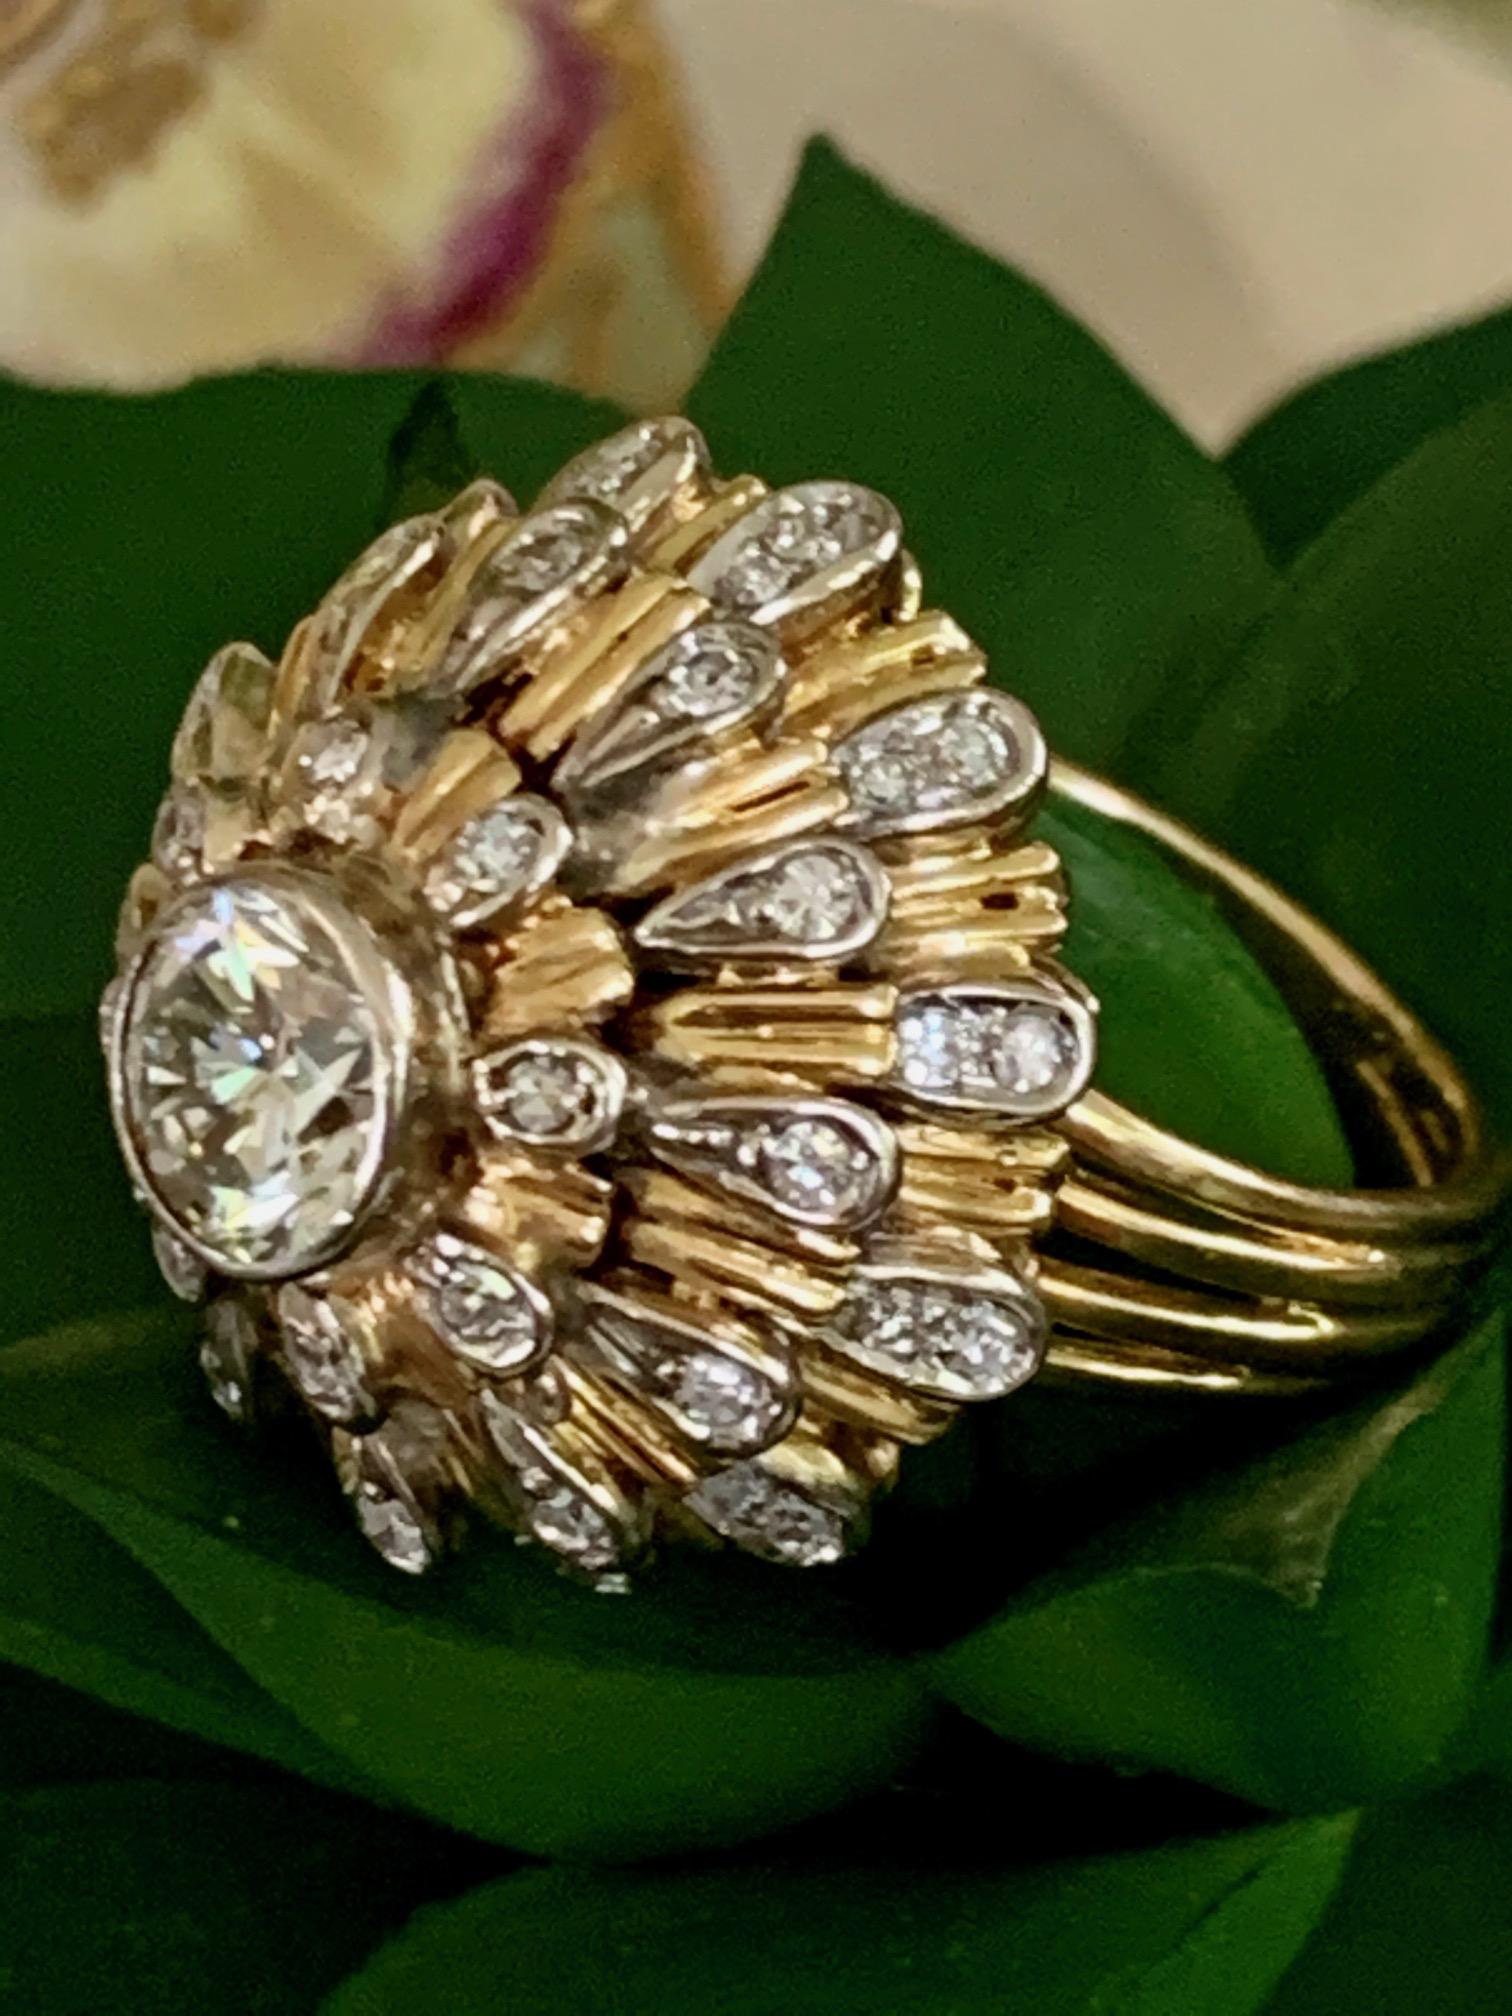 This dome ring features a 1.0ct bezel set, brilliant cut Diamond as the center stone which measures 6,4mm. The grade is approximately VS-KL.  The center Diamond is surrounded by single cut Diamonds weighing .70ctw.

Weight: 12.4 grams
Size: 6